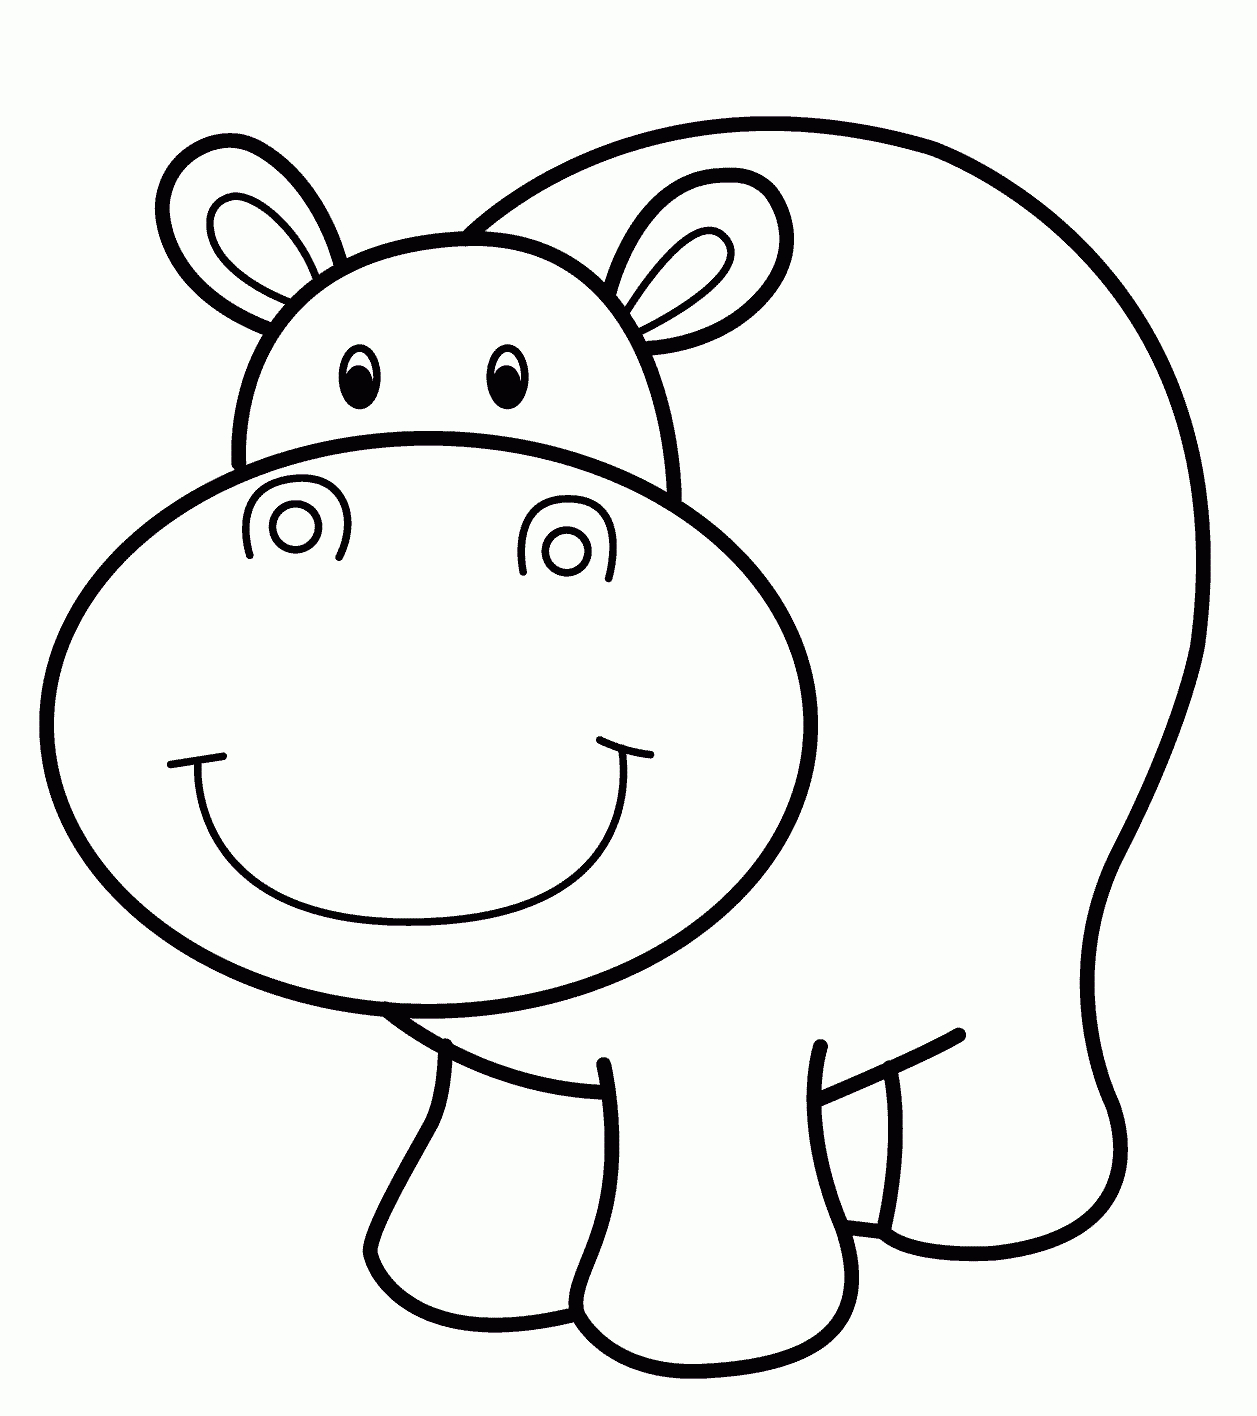 Hippo Coloring Pages Printable Free | Coloring Sheets | Easy - Free Printable Hippo Coloring Pages